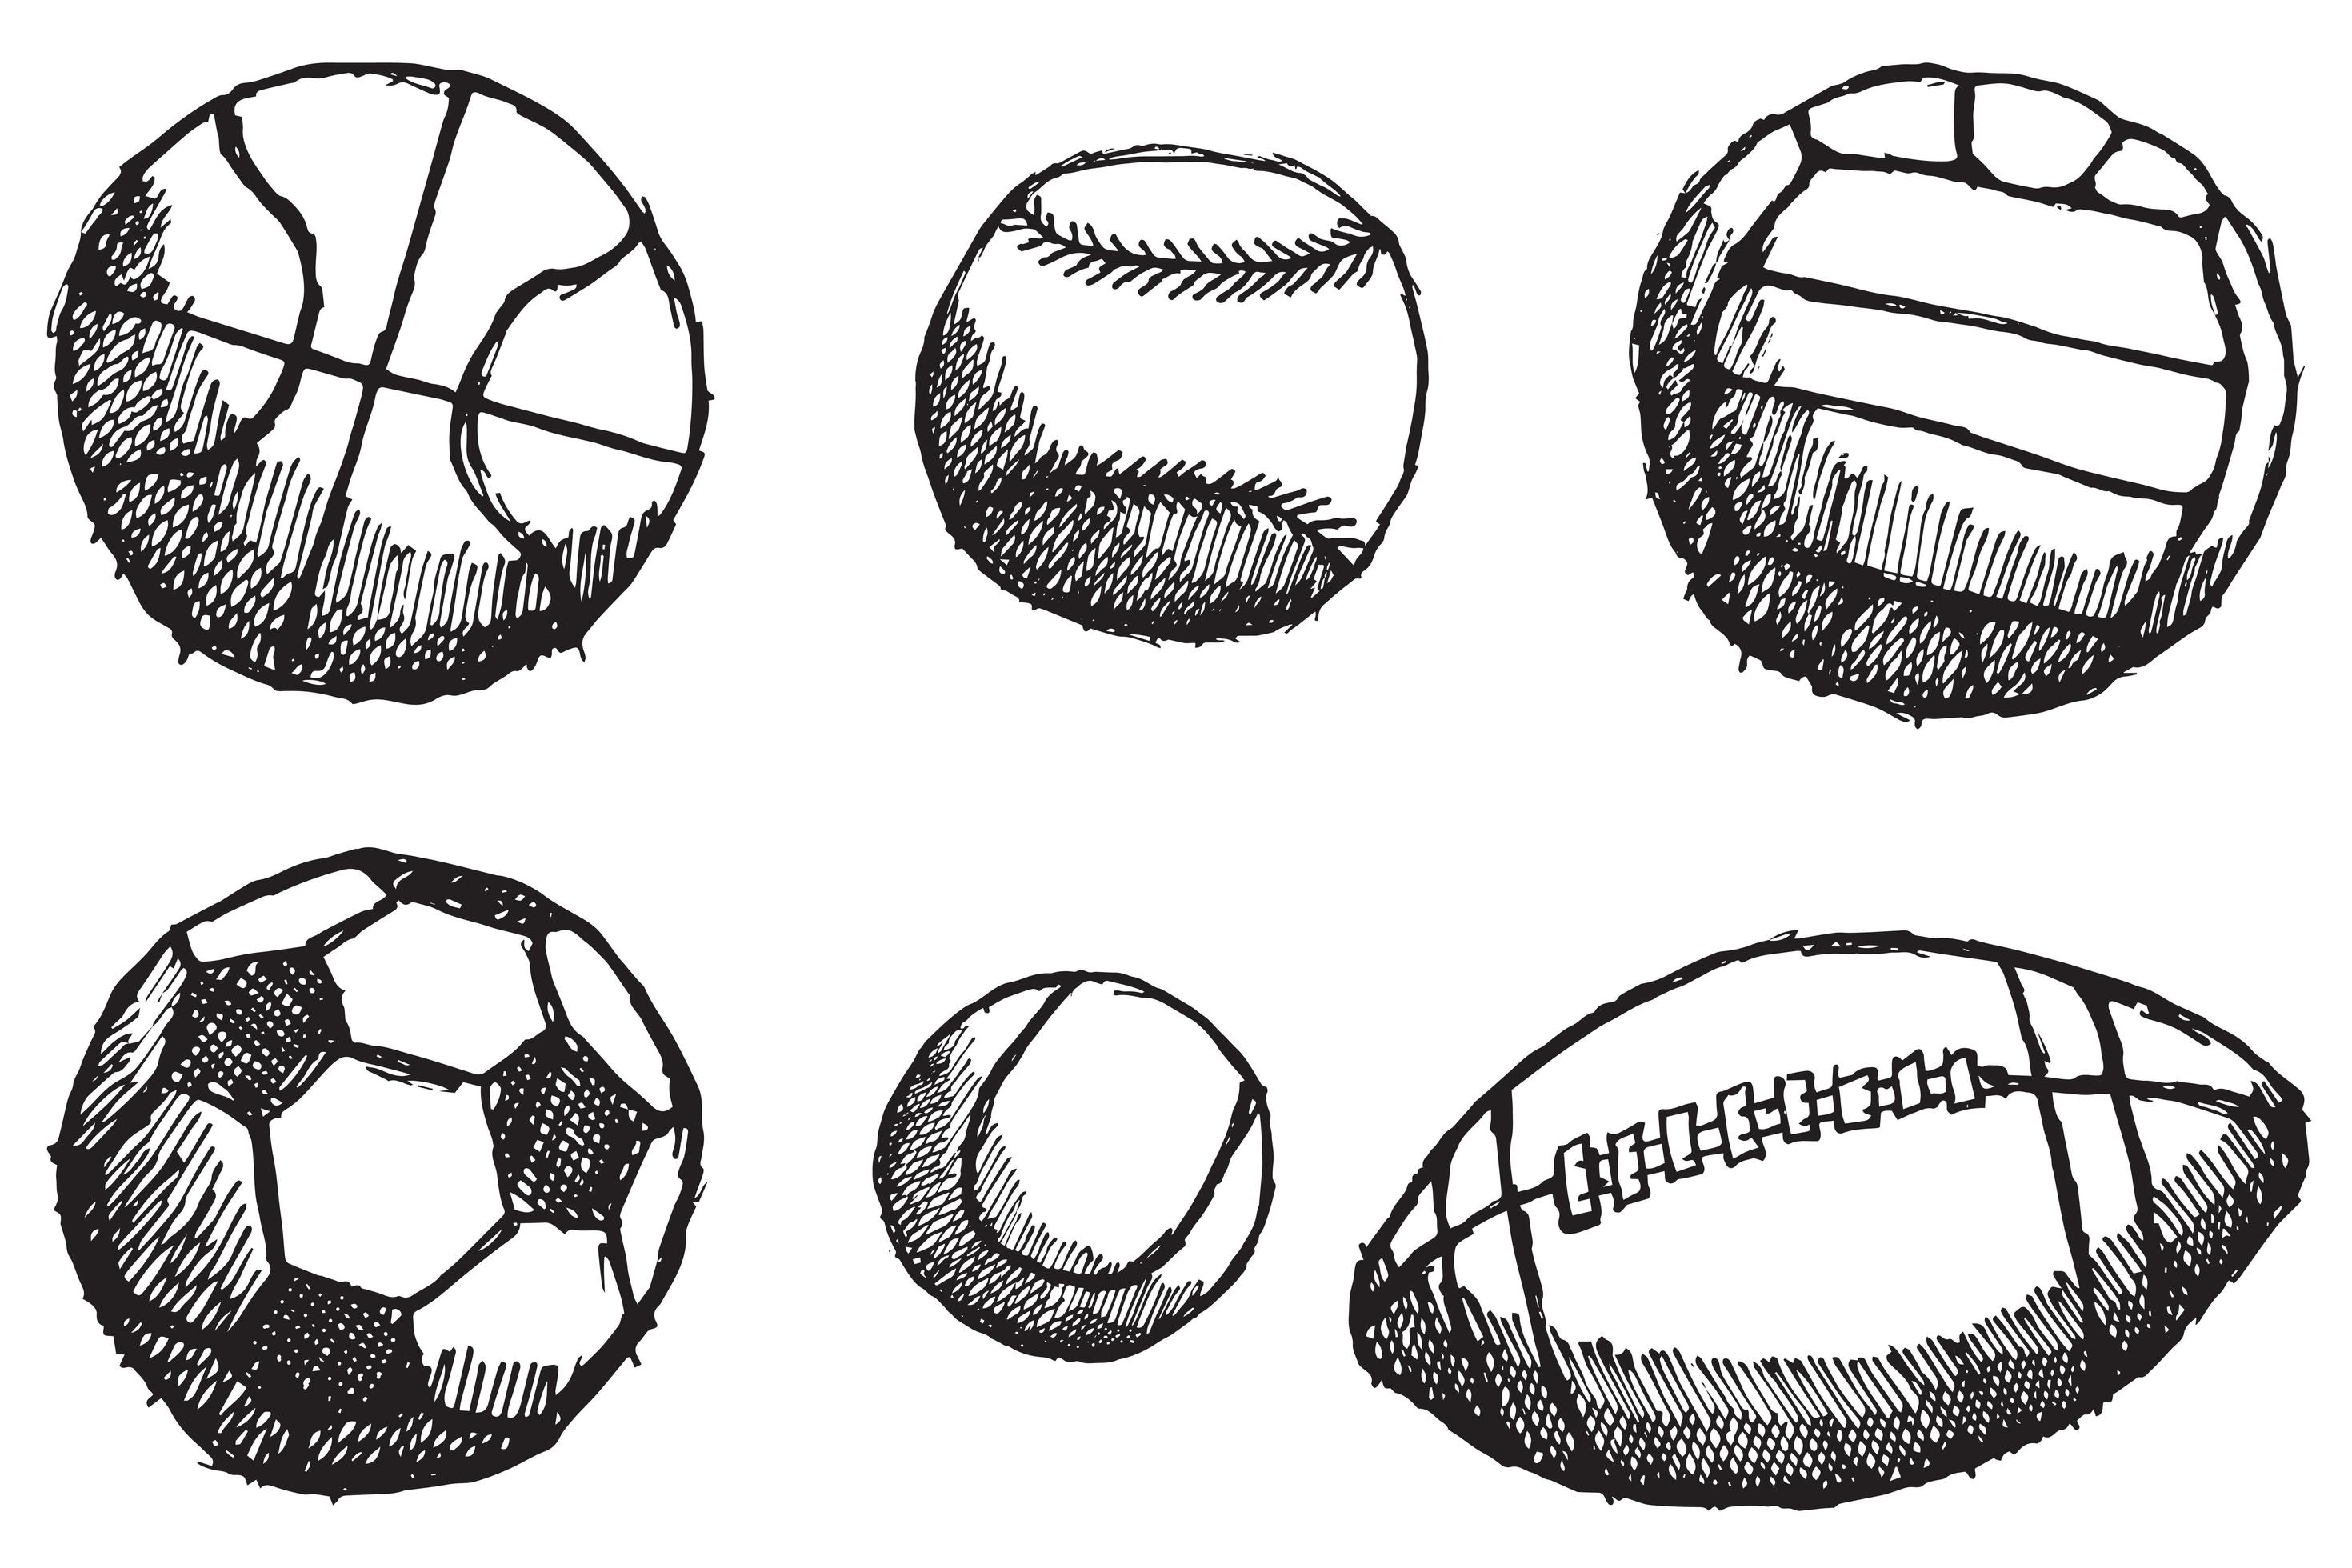 Ball sketch set with shadow isolated on white background 2285980 Vector